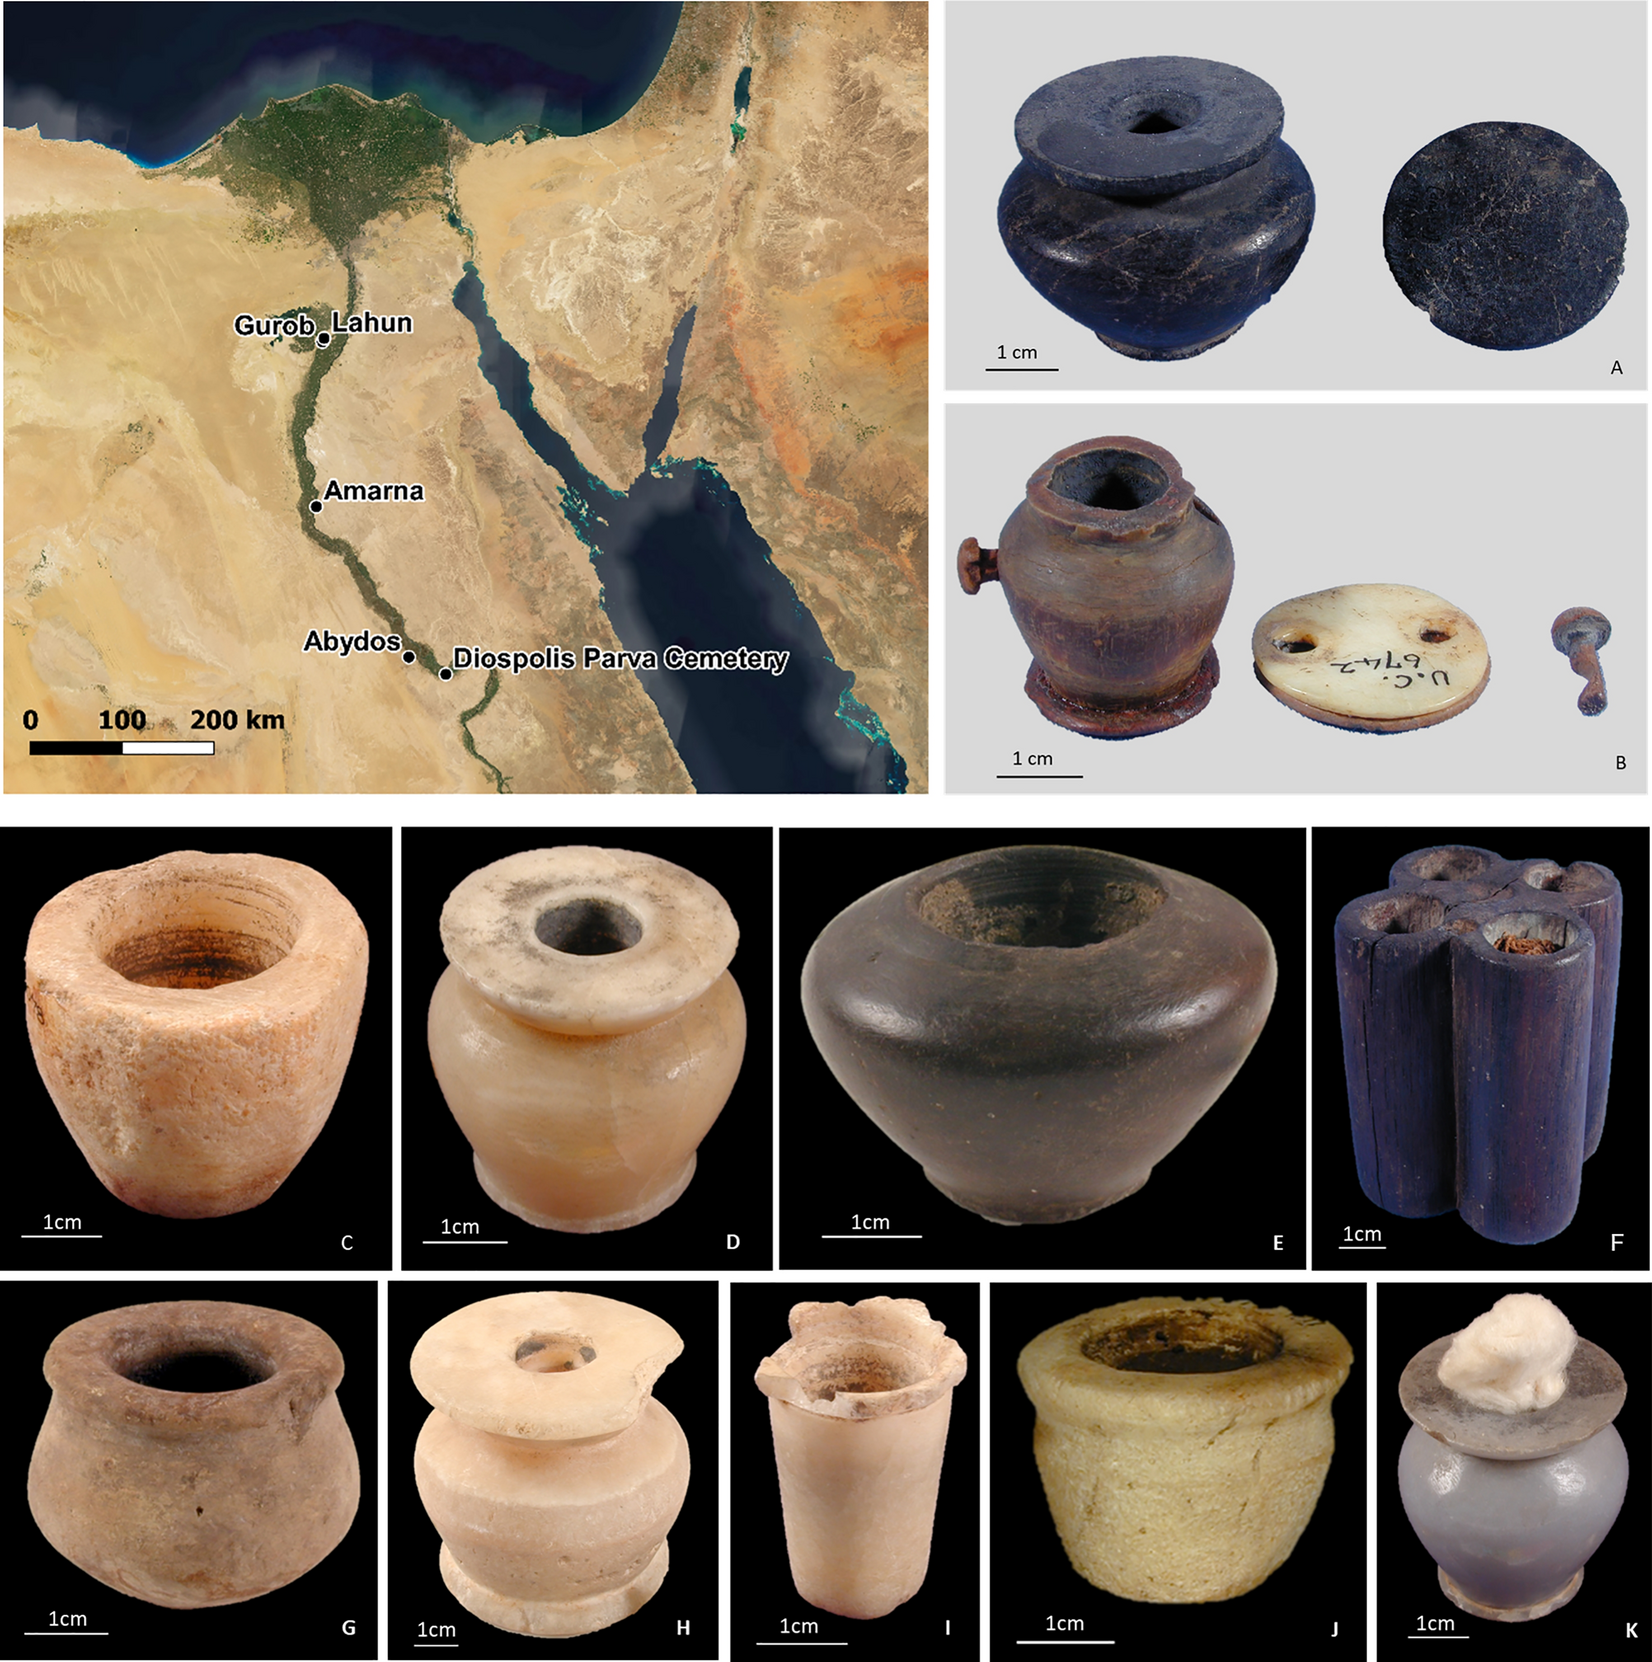 Recipes of Ancient Egyptian kohls more diverse than previously thought